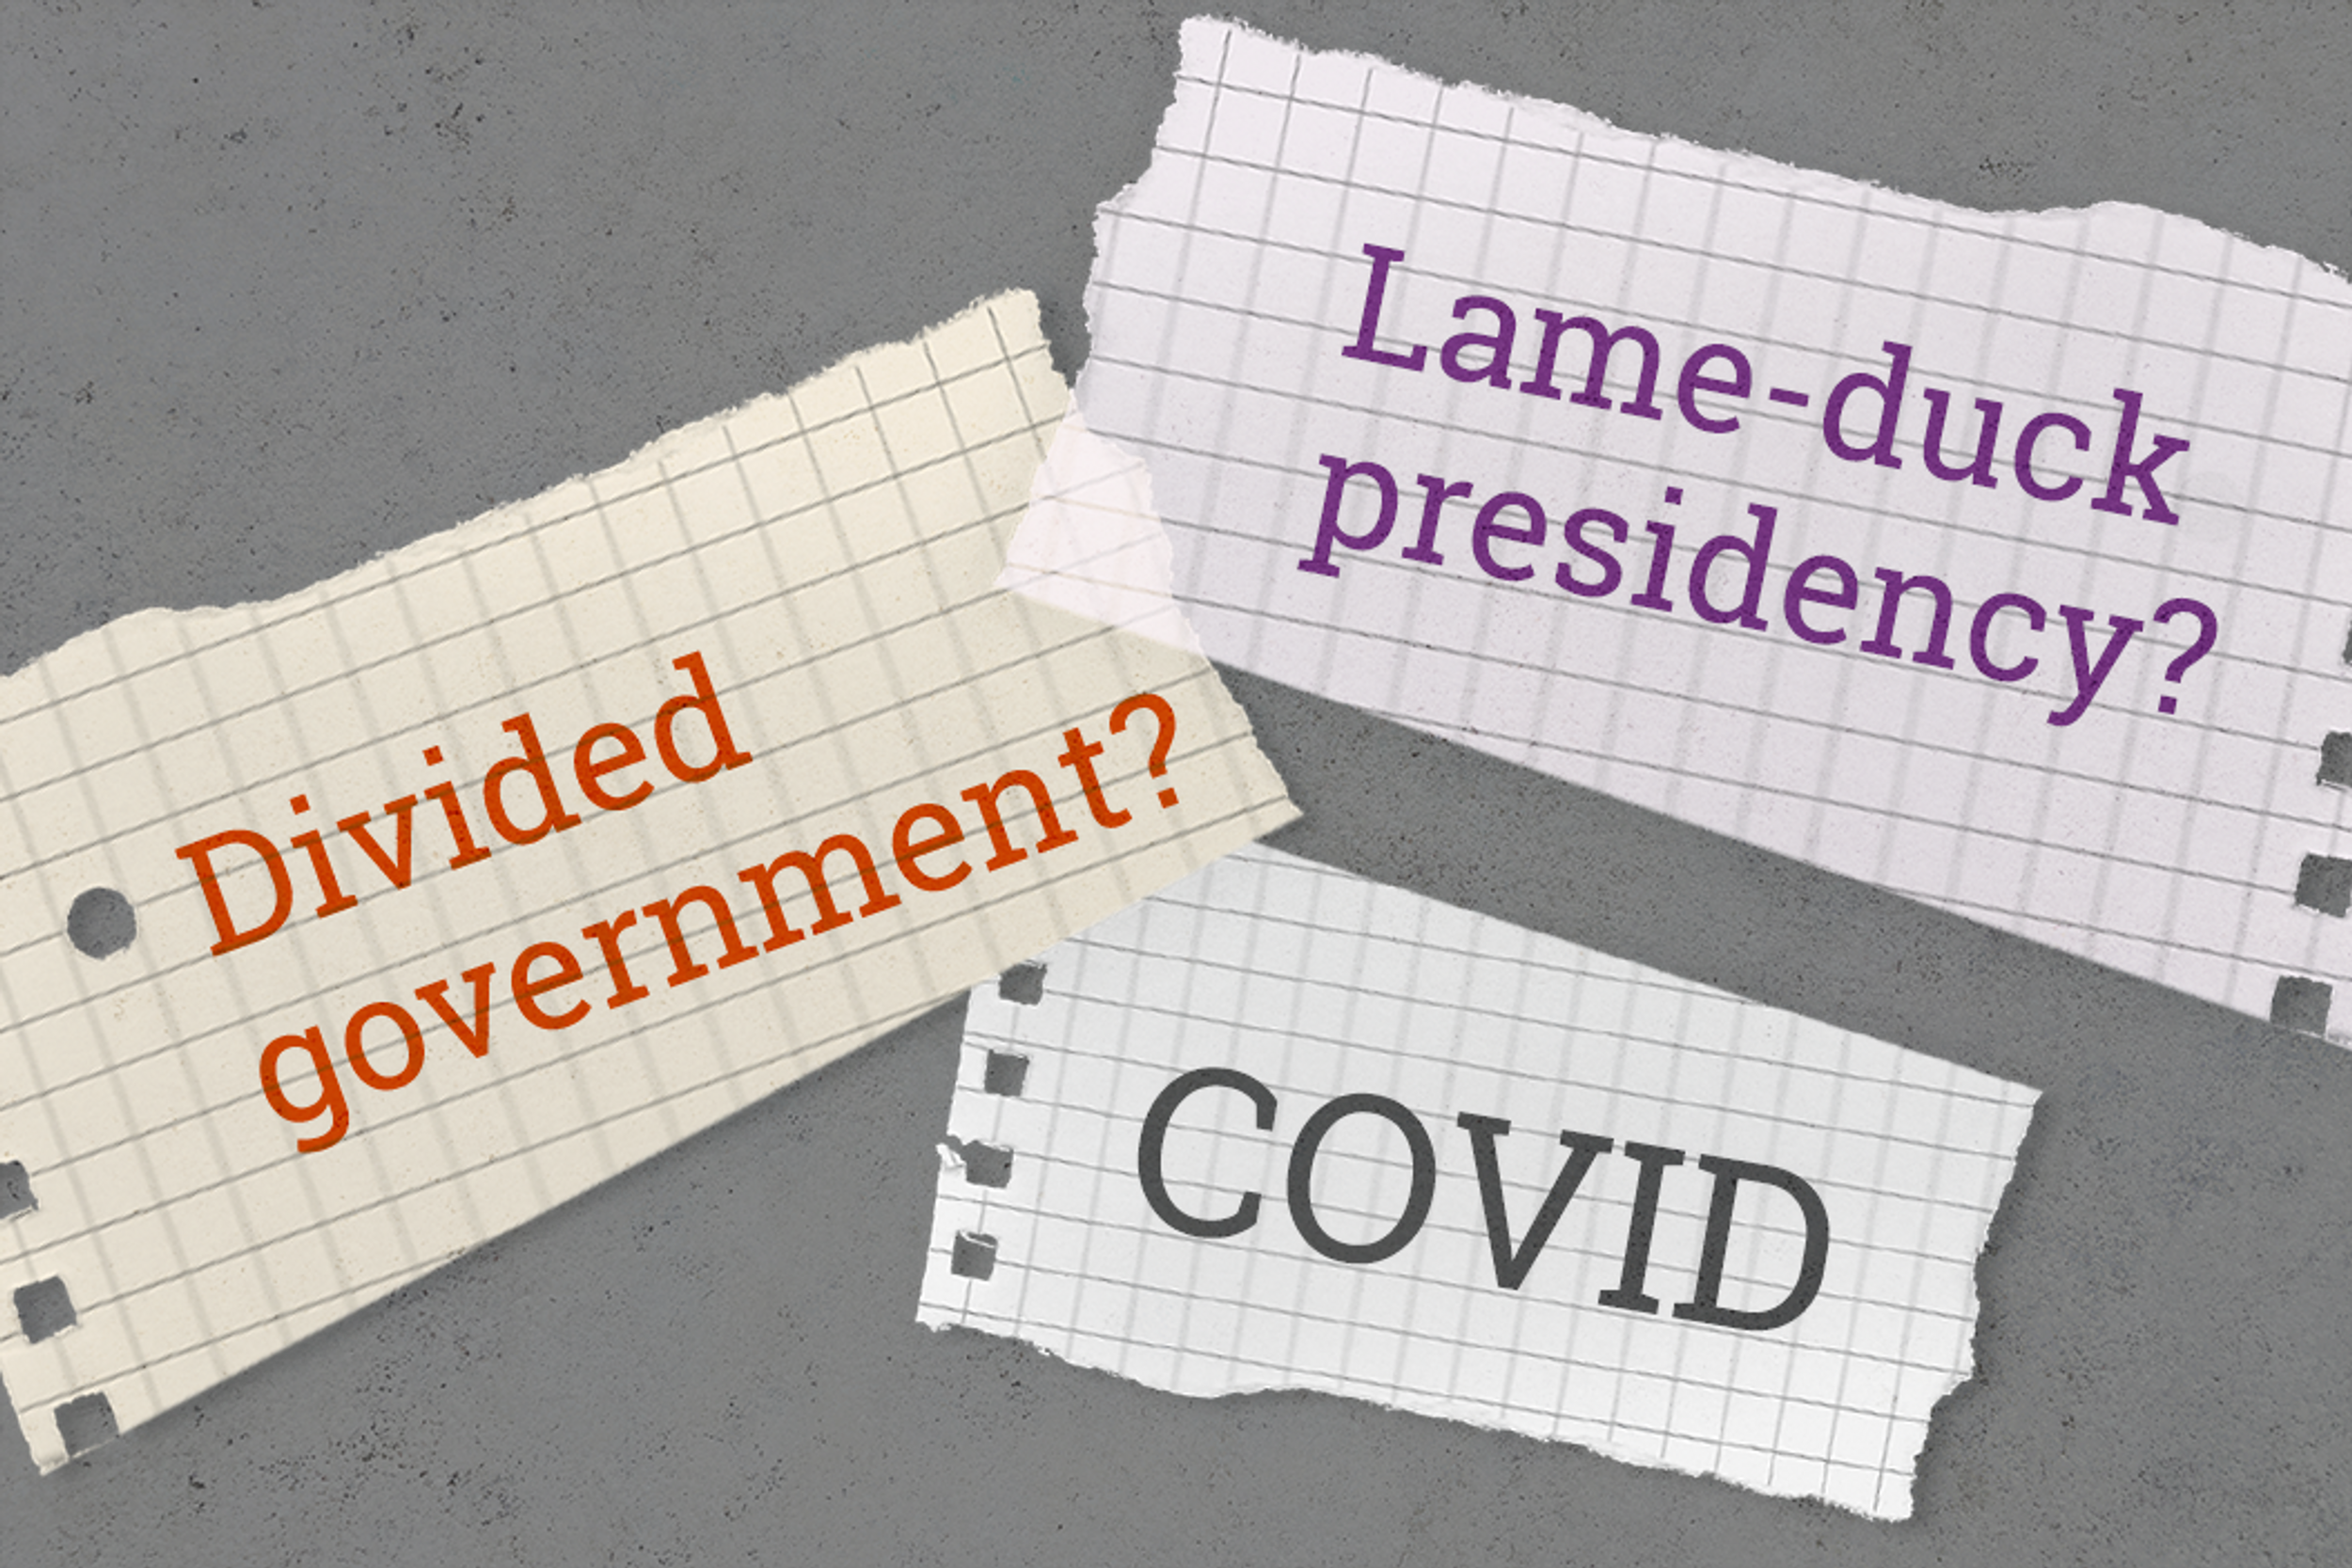 Art featuring the following copy in bold: Divided government?; COVID; Lame-duck presidency?